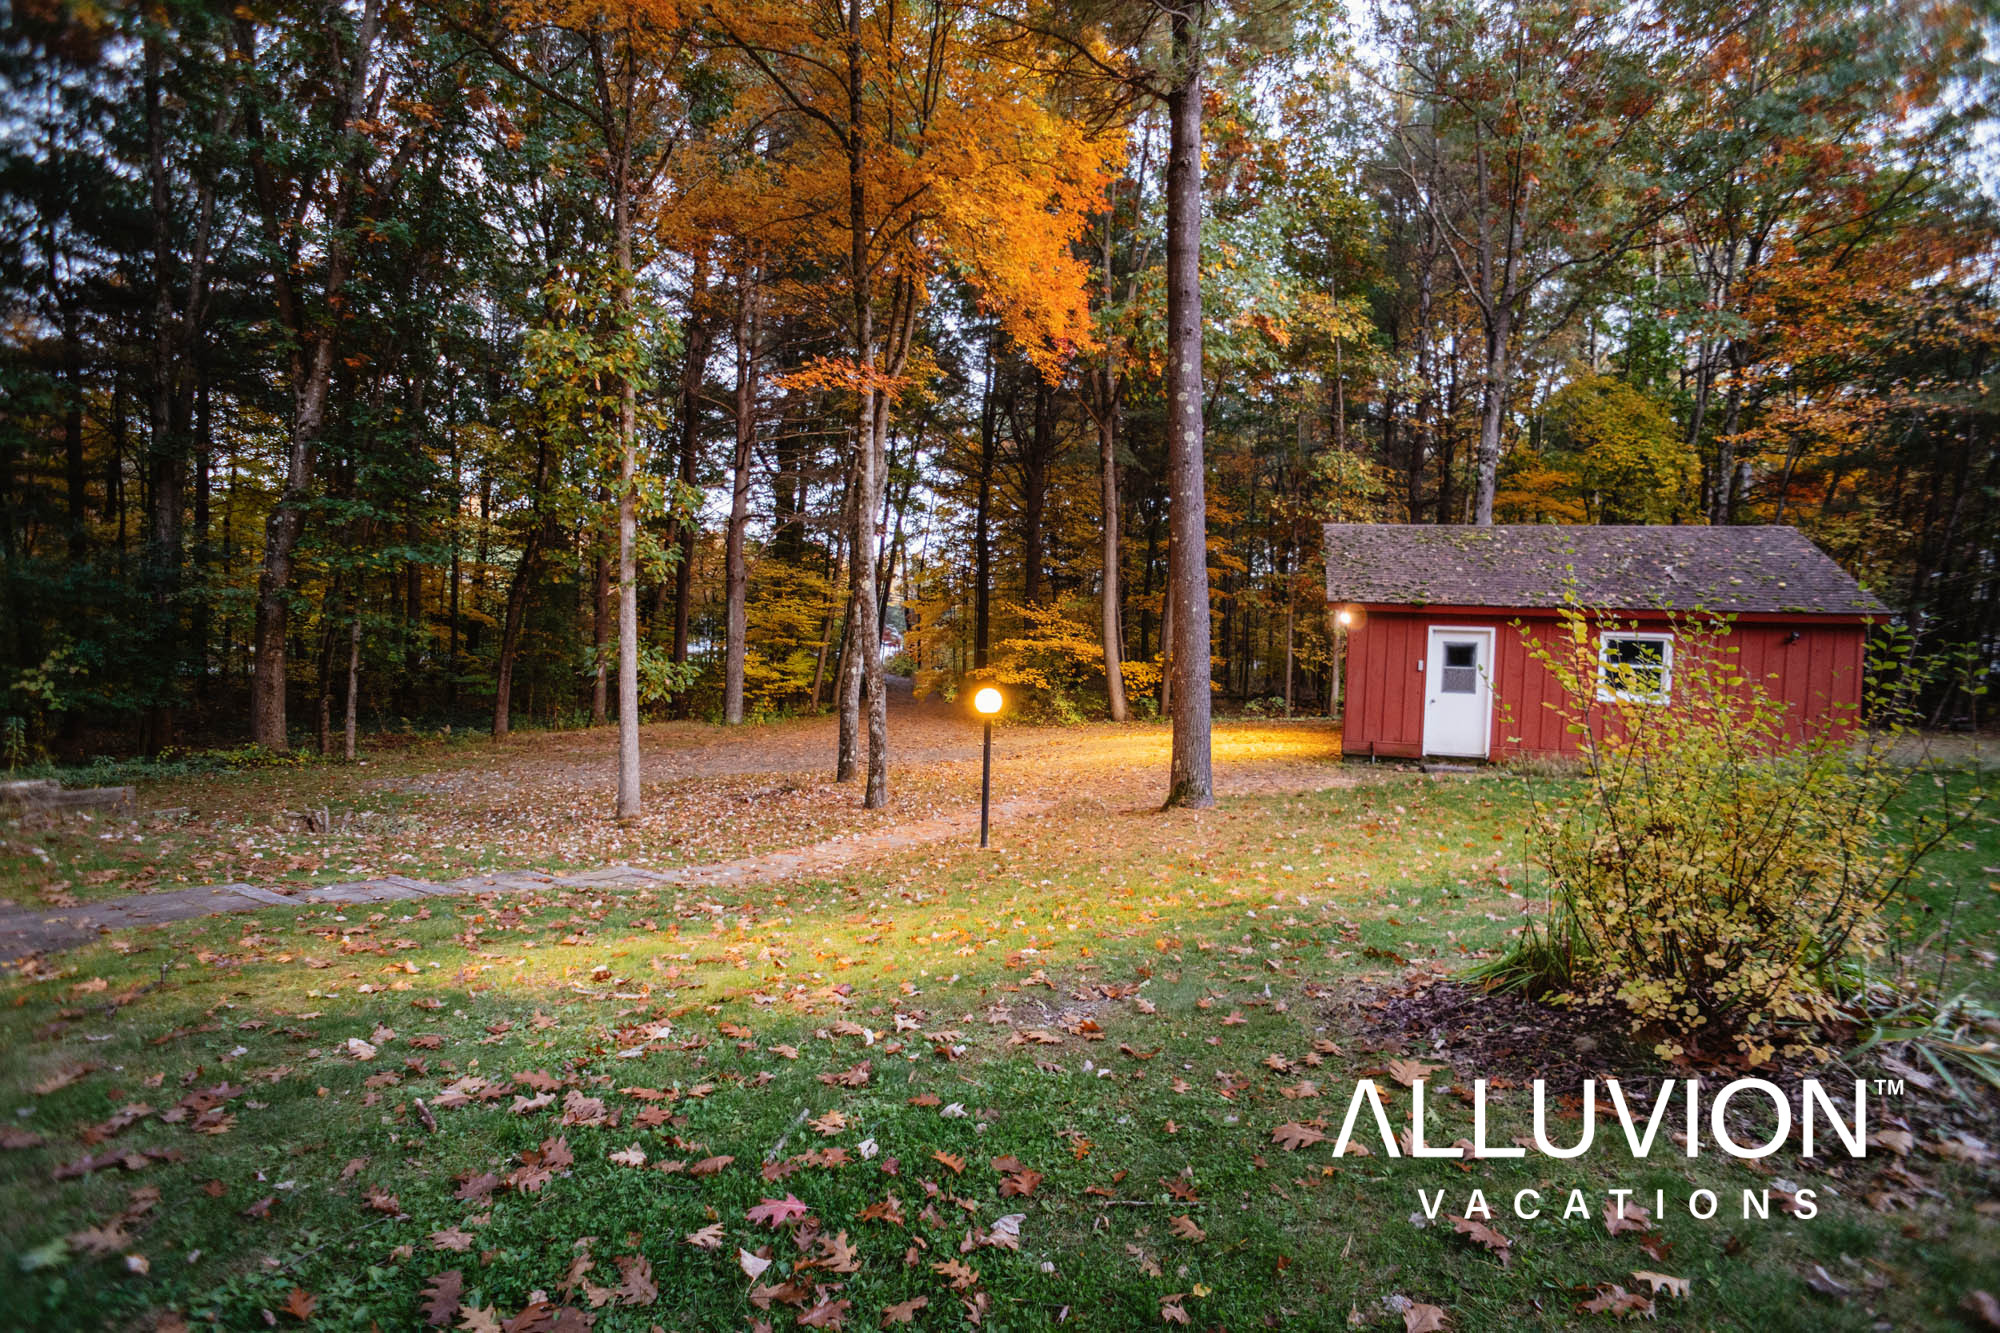 Find serenity at Alluvion Vacations’ Private Getaway Airbnb Cabin near Hudson, NY – Best Airbnb Cabins in New York